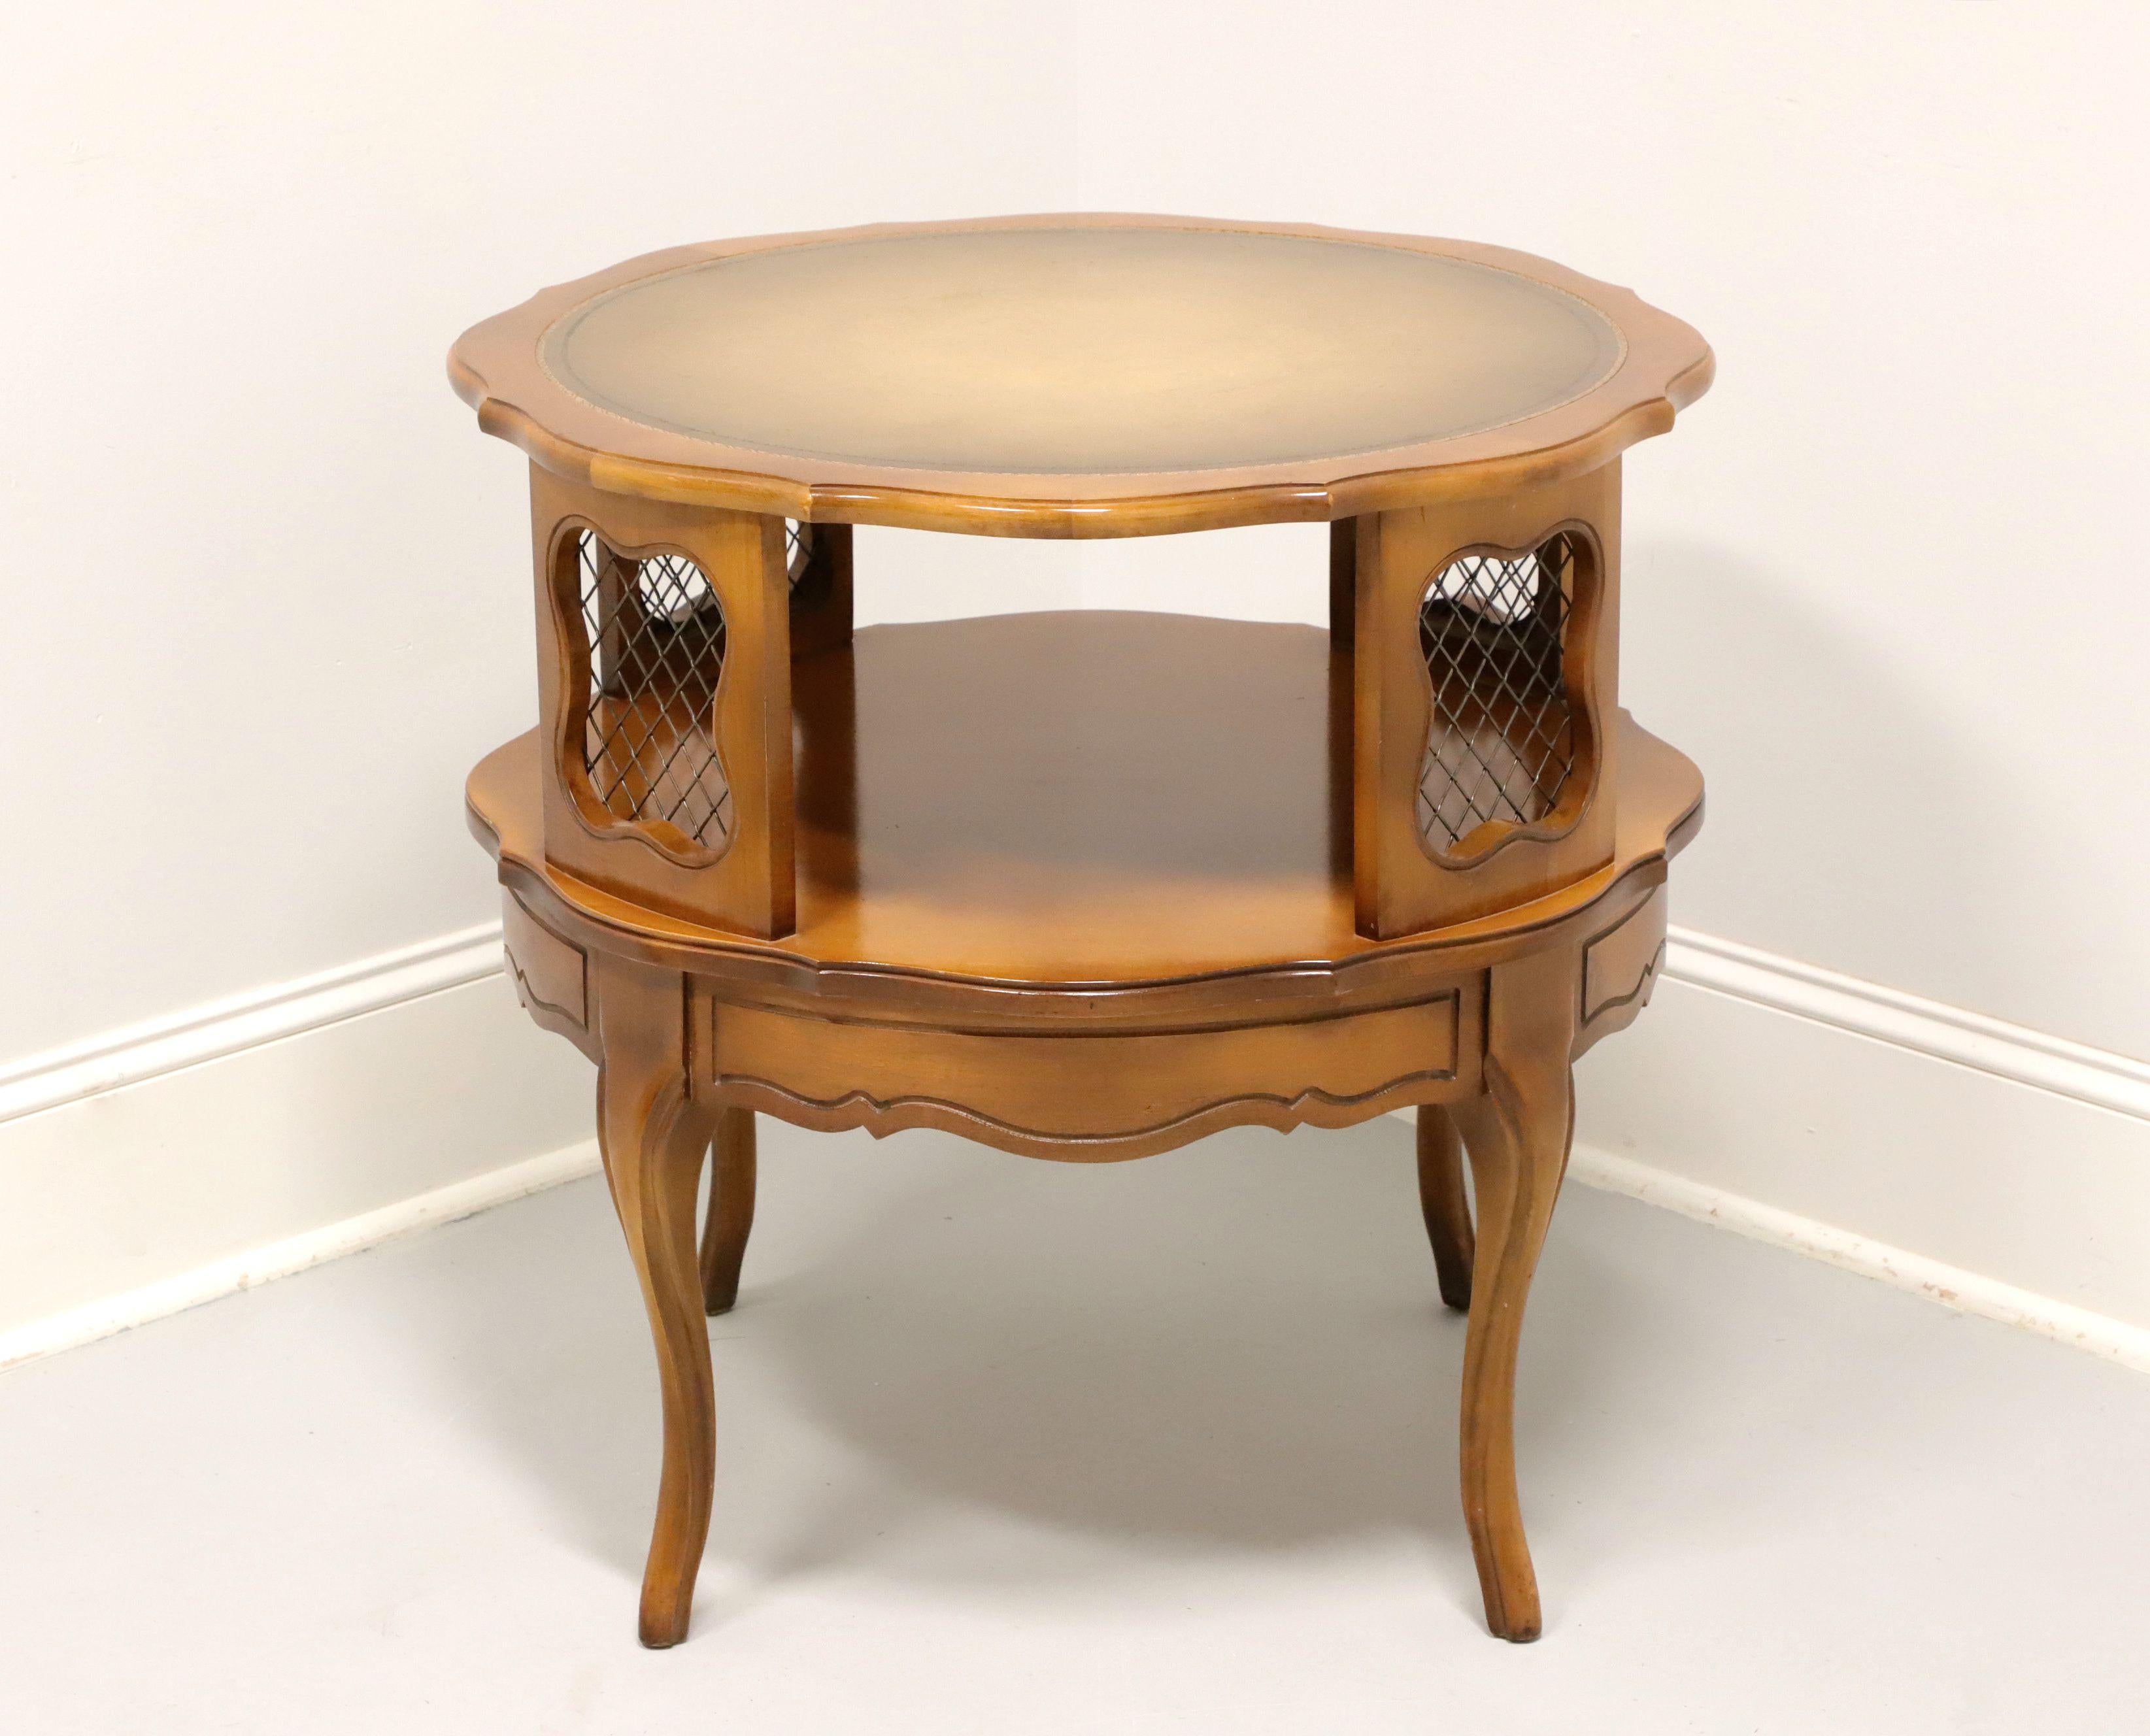 A French Provincial style round leather top accent table, unbranded, similar quality to Weiman. Hardwood, embossed leather top with scalloped edges, four panels with encased brass mesh support the top, undertier shelf, carved apron, and curved legs.